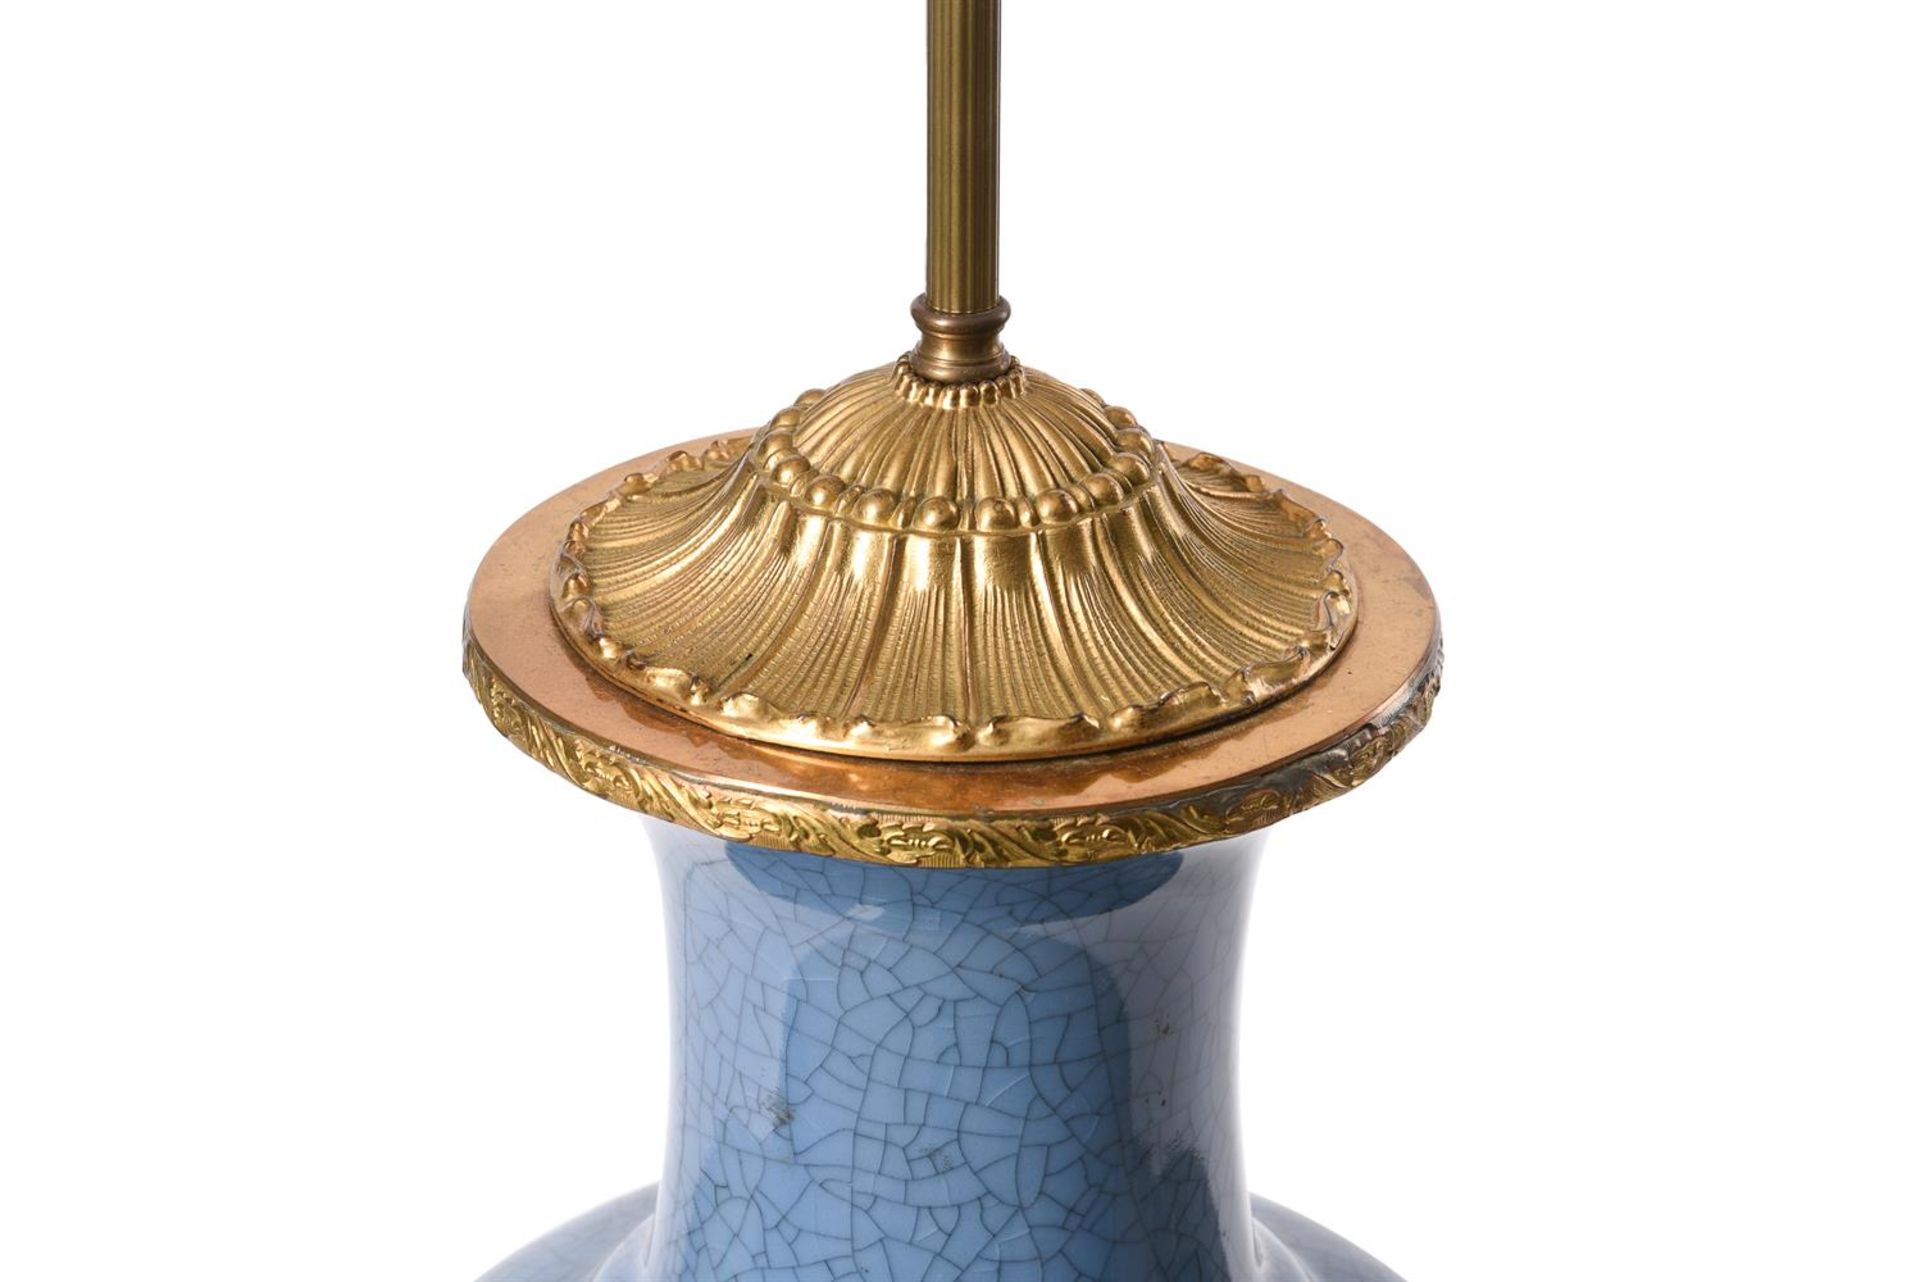 A PAIR OF GILT METAL MOUNTED BLUE CRACKLE GLAZED PORCELAIN TABLE LAMPS - Image 3 of 3